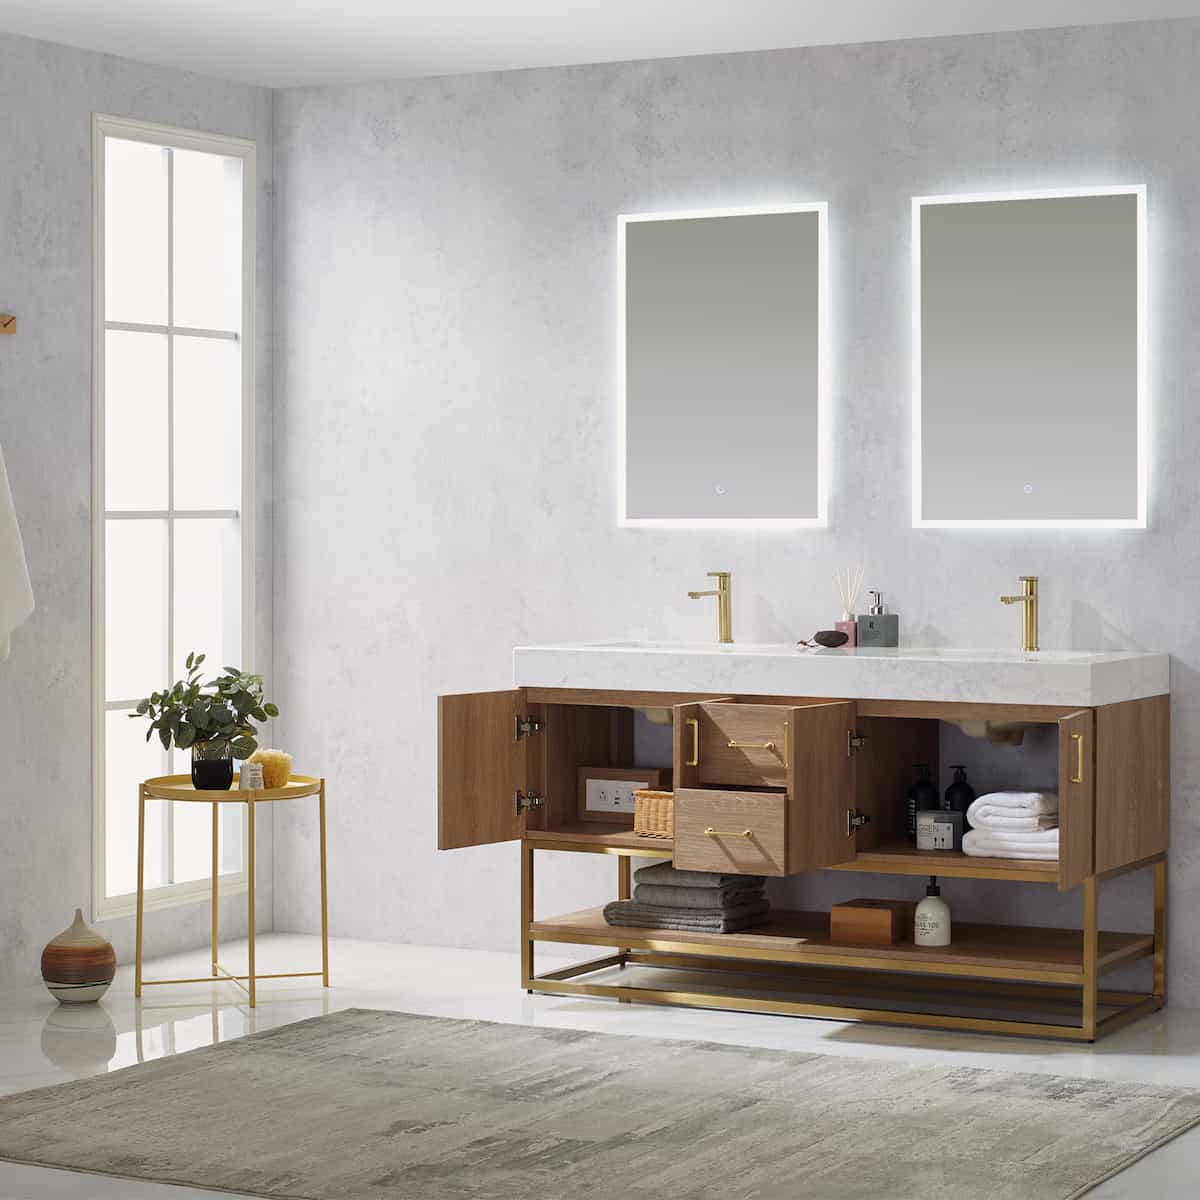 Vinnova Alistair 60 Inch Freestanding Double Vanity in North American Oak and Brushed Gold Frame with White Grain Stone Countertop With Mirrors Inside 789060-NO-GW